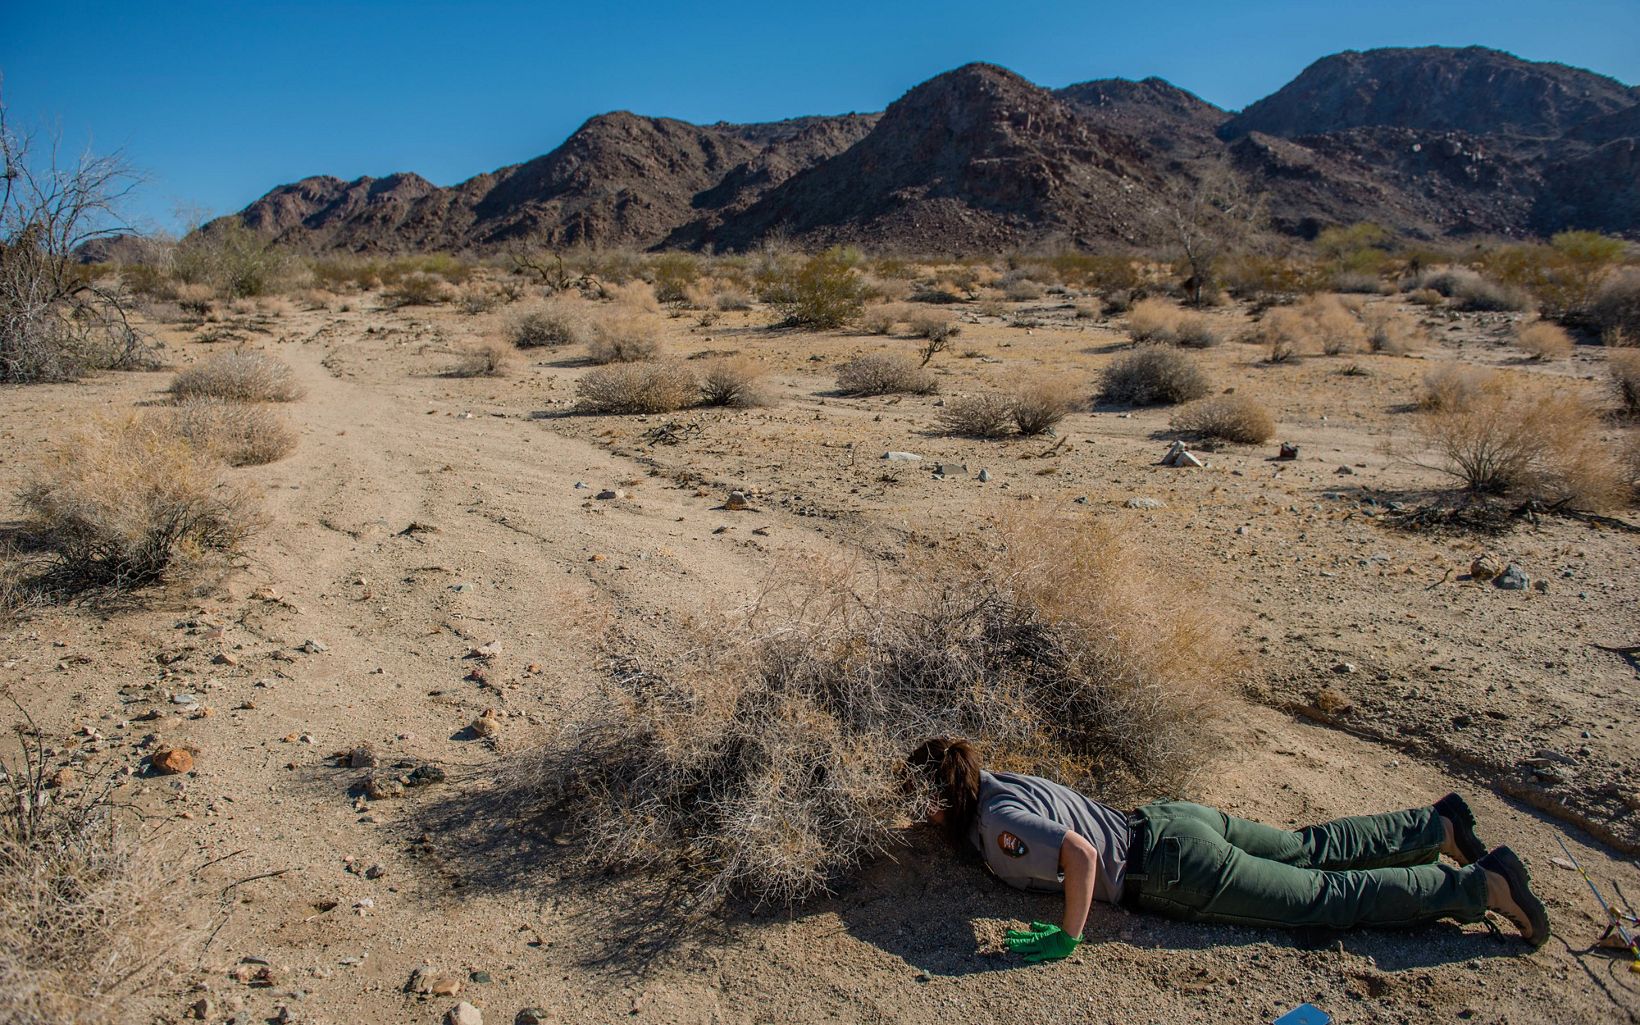 Kristen Lalumiere places tracking location transmitters on a desert tortoise in Joshua Tree National Park.